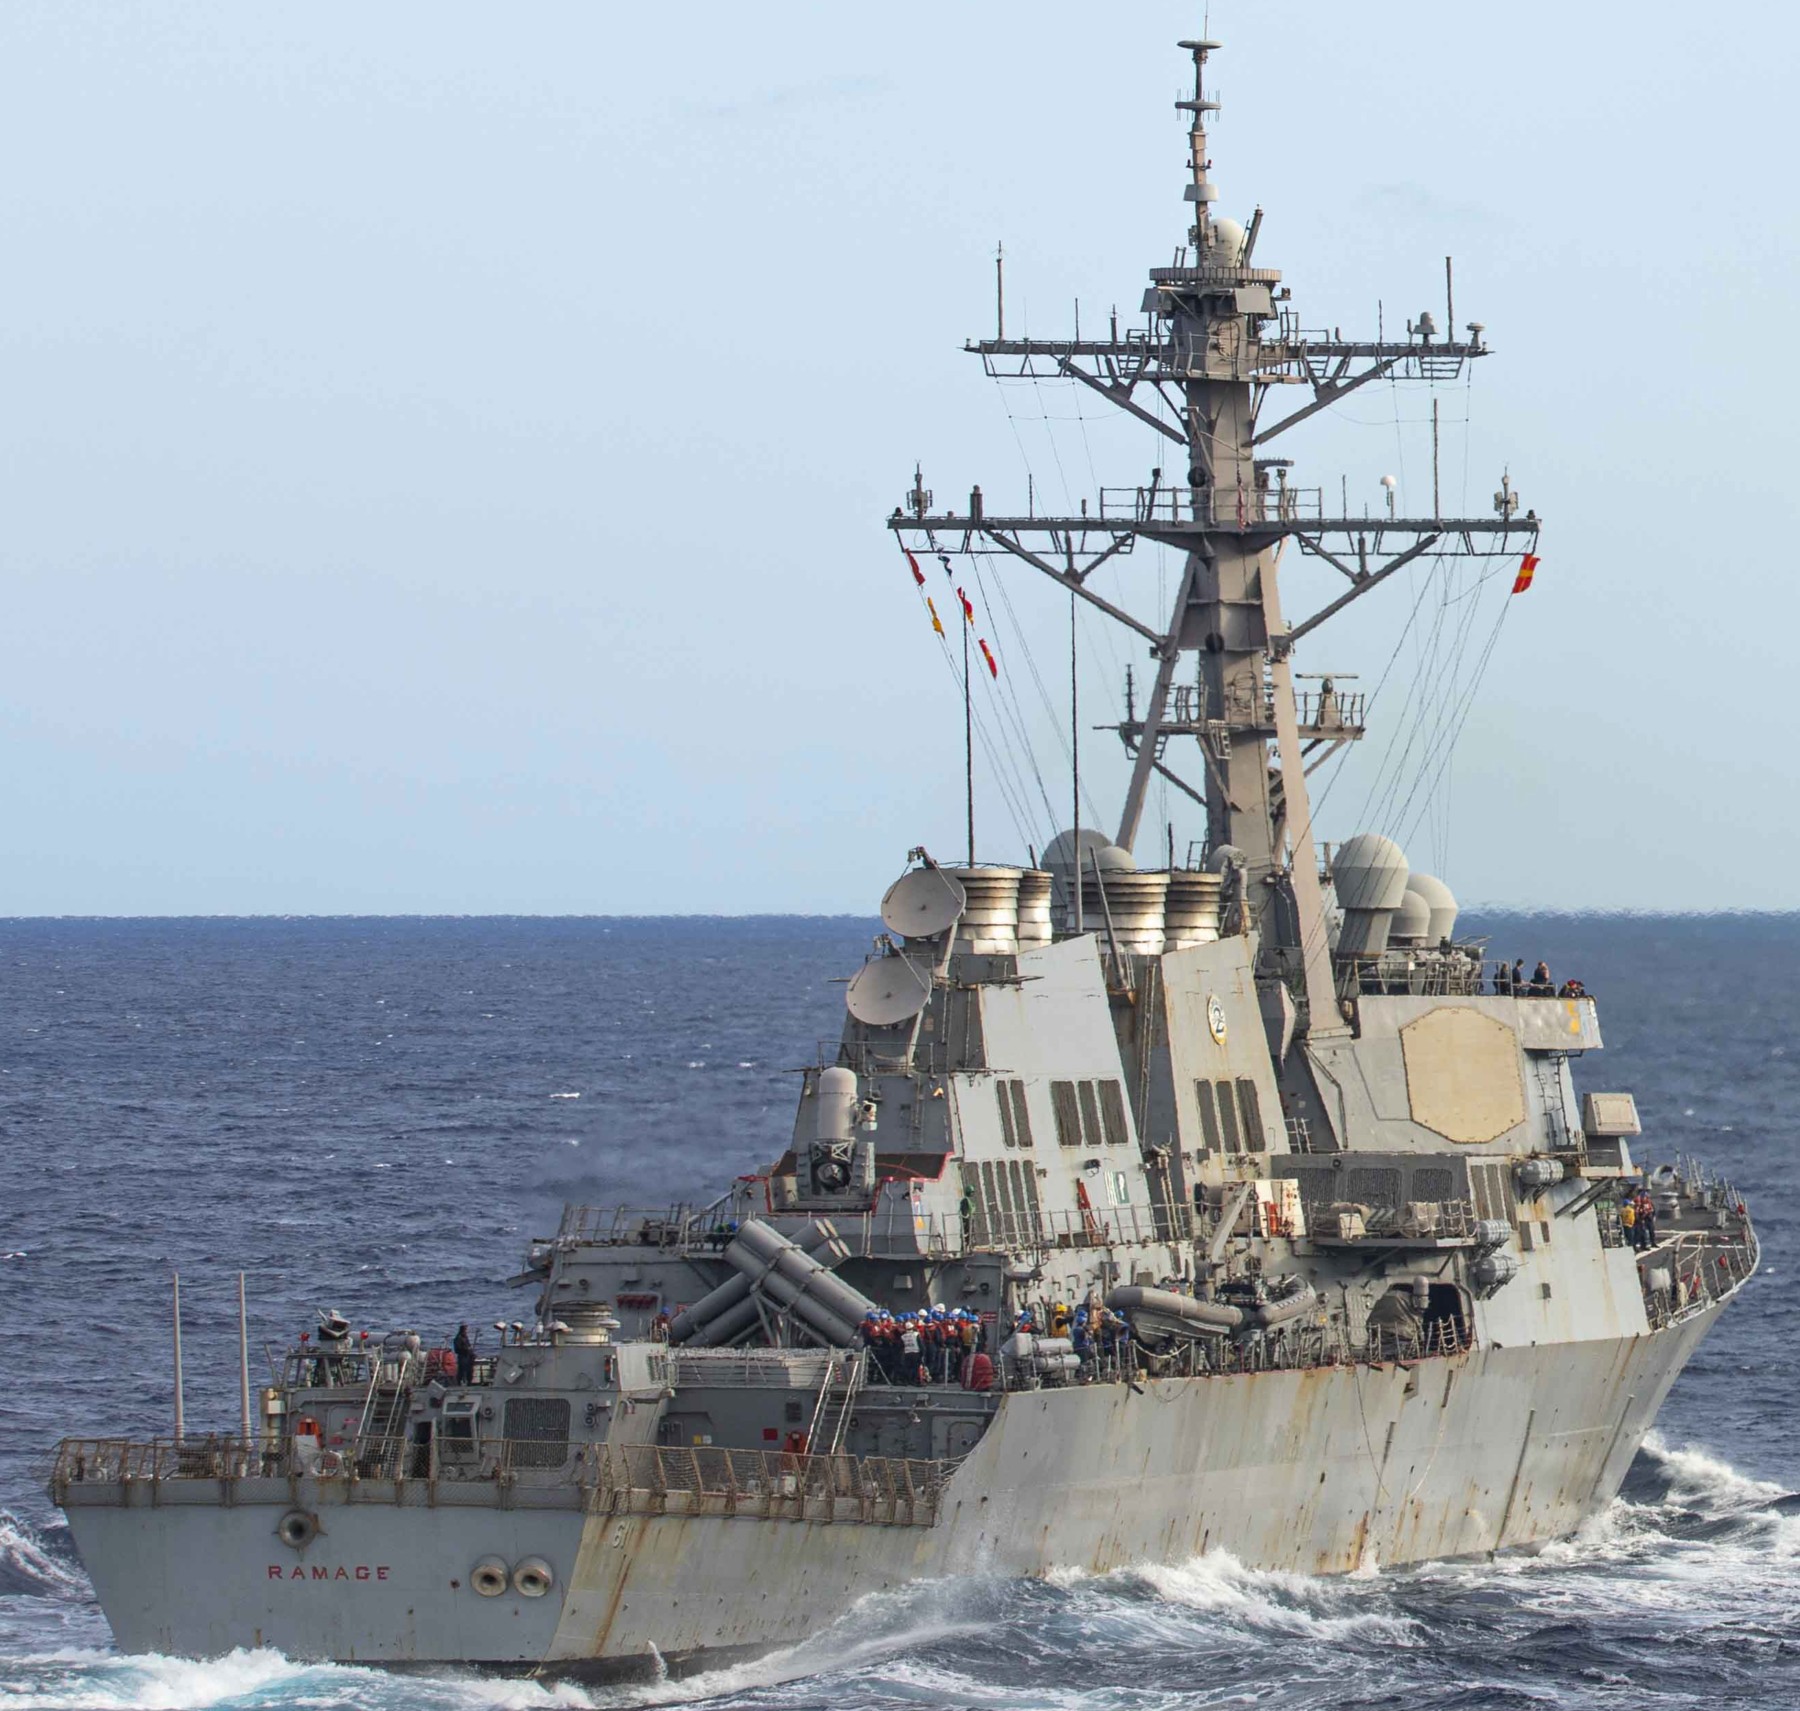 ddg-61 uss ramage guided missile destroyer arleigh burke class aegis us navy 108